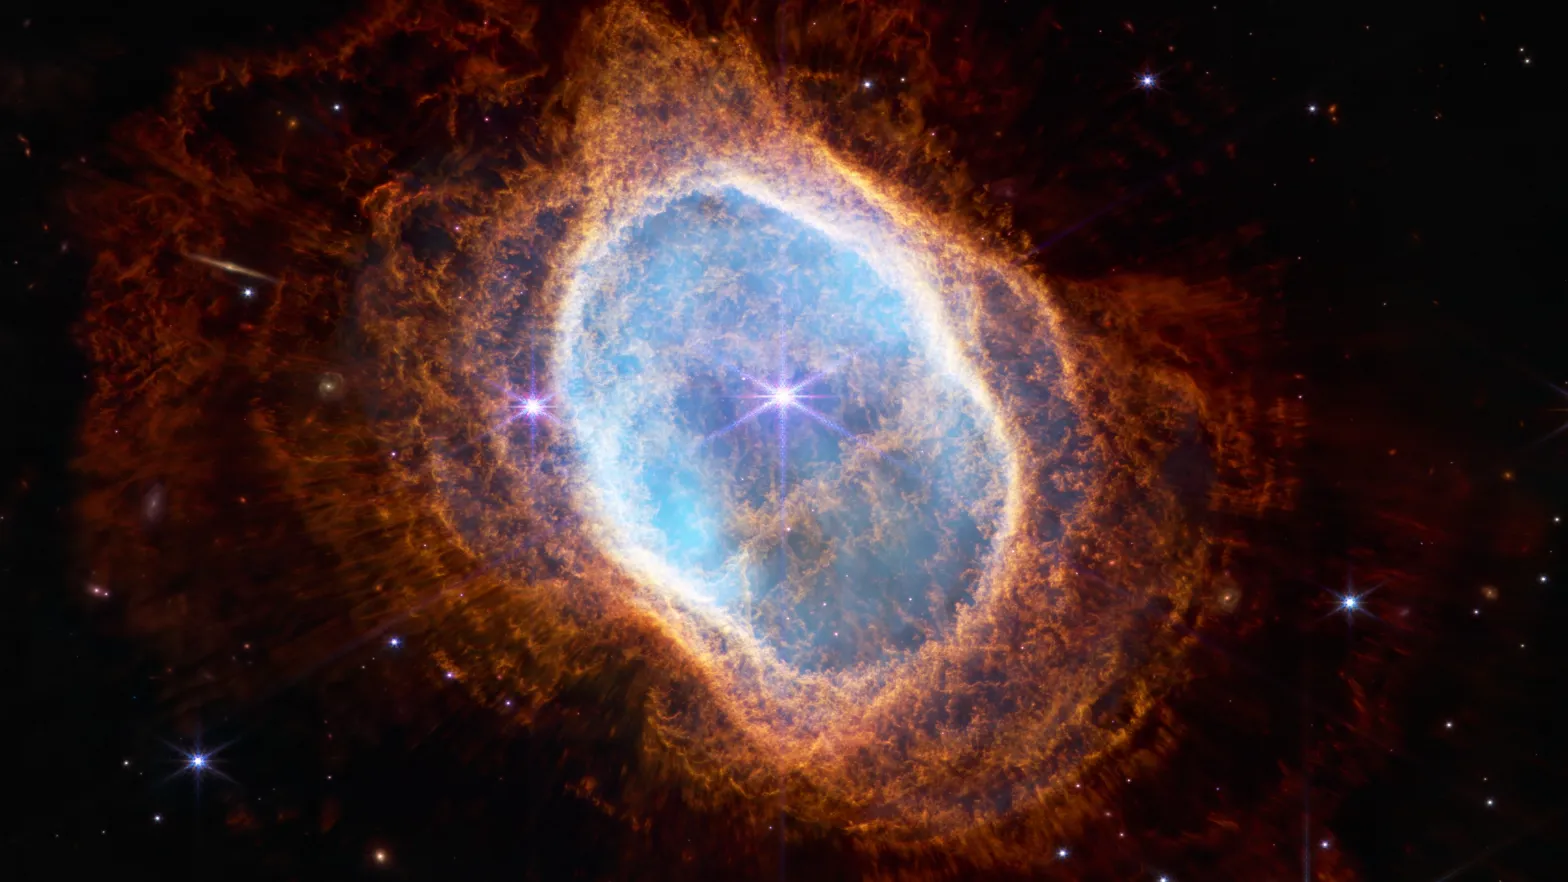 The Ring Nebula, a planetary nebula in Carina constellation, reveals new insights into the universe's mysteries